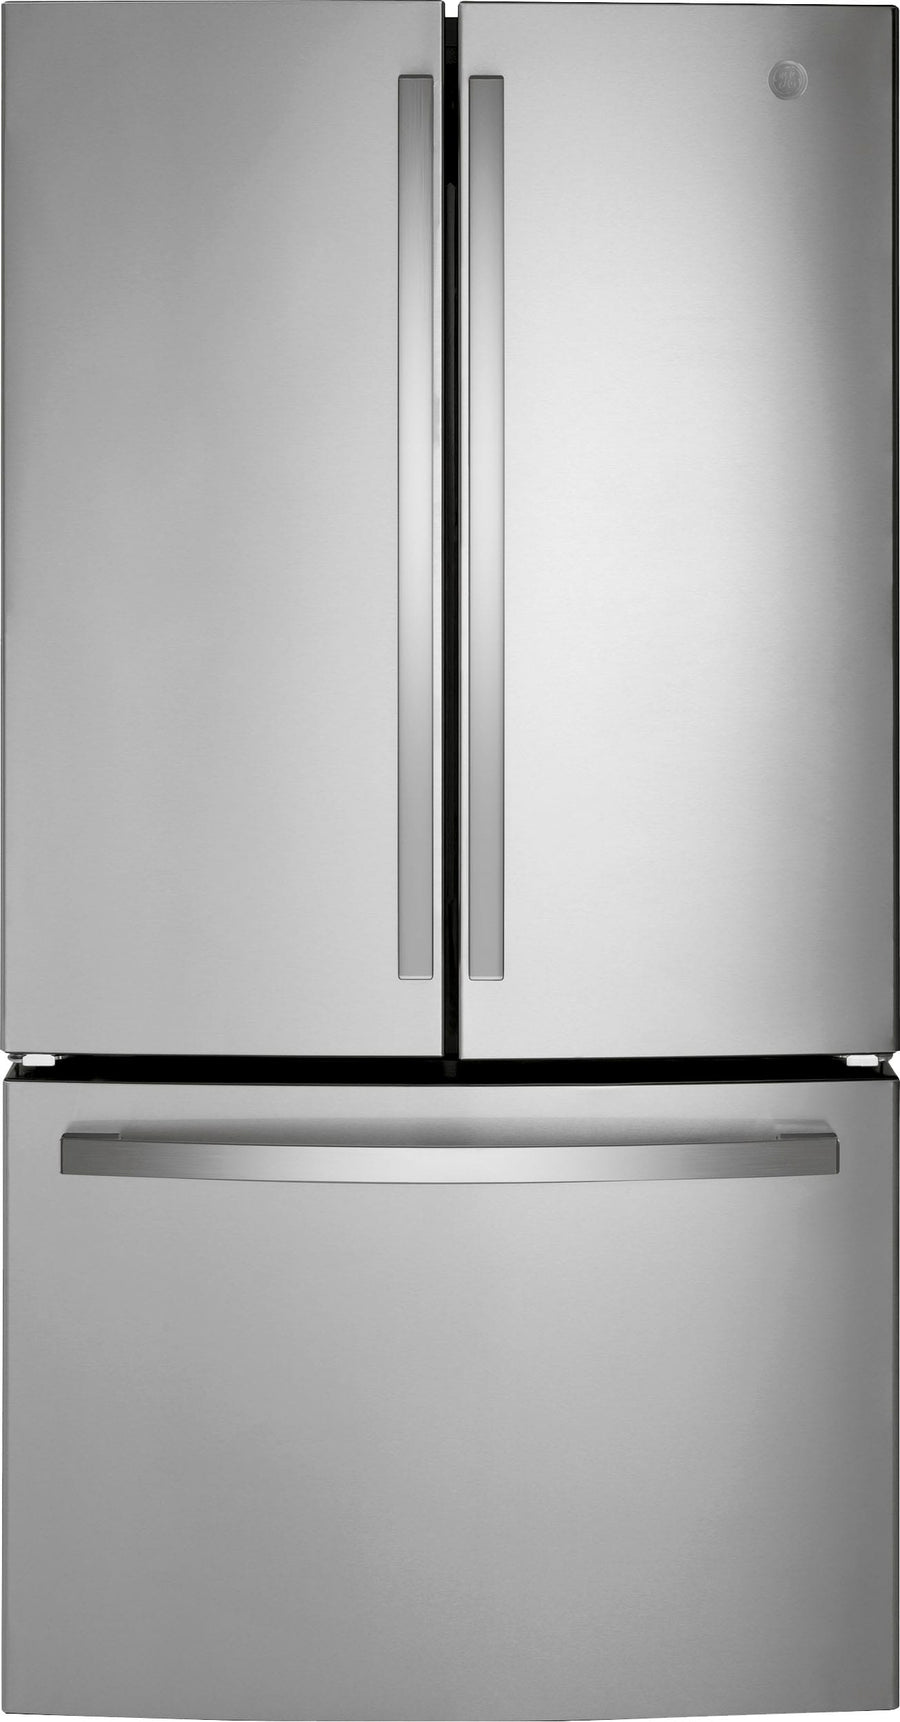 GE - 27.0 Cu. Ft. French Door Refrigerator with Internal Water Dispenser - Stainless steel_0